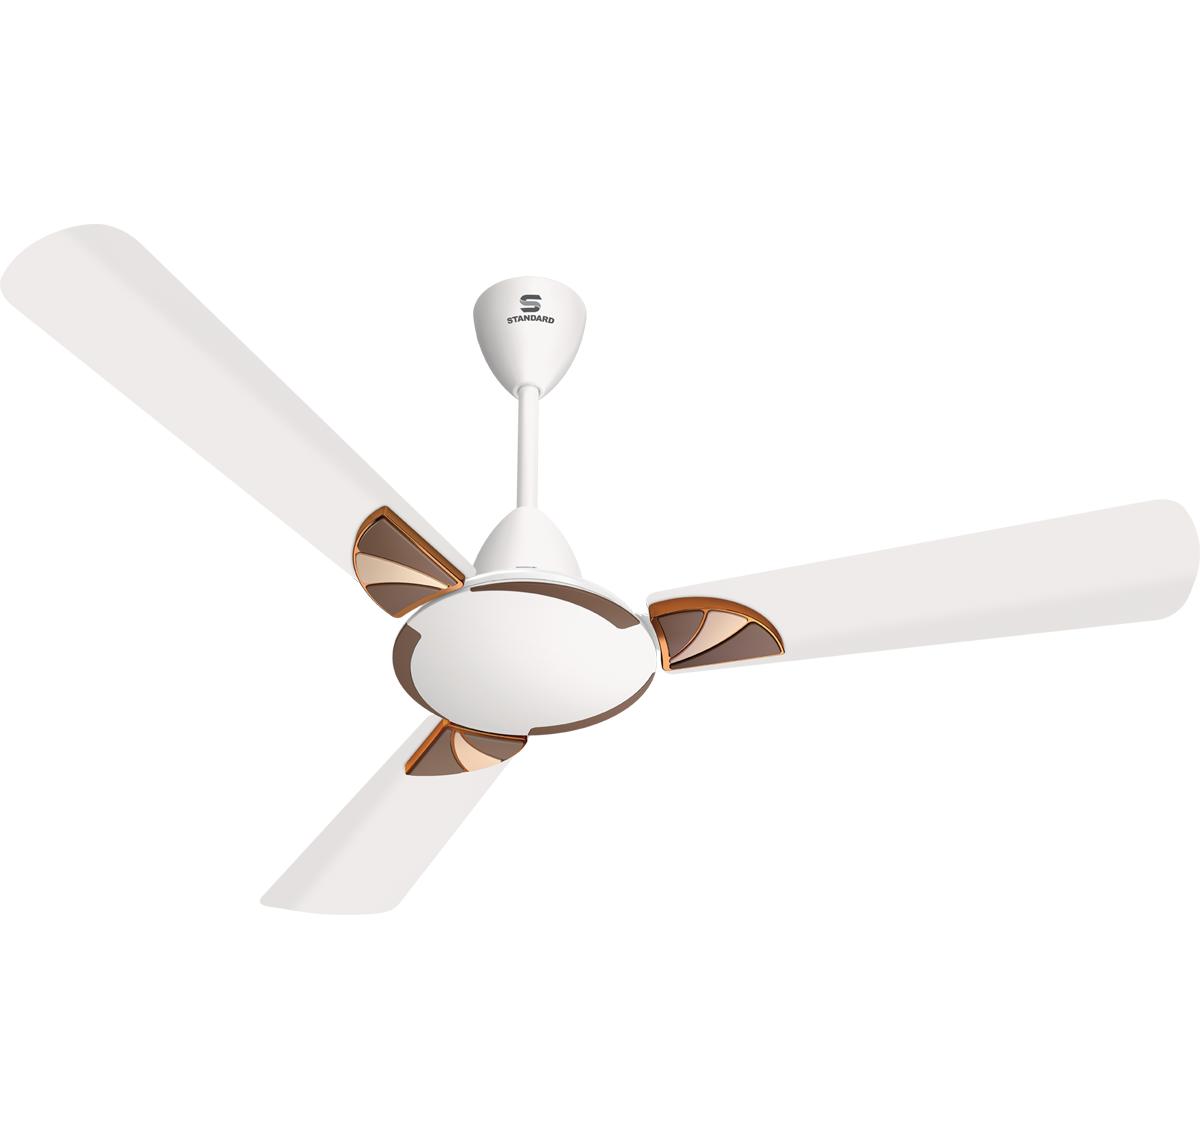 Buy India's Best Ceiling Fans - standard electricals